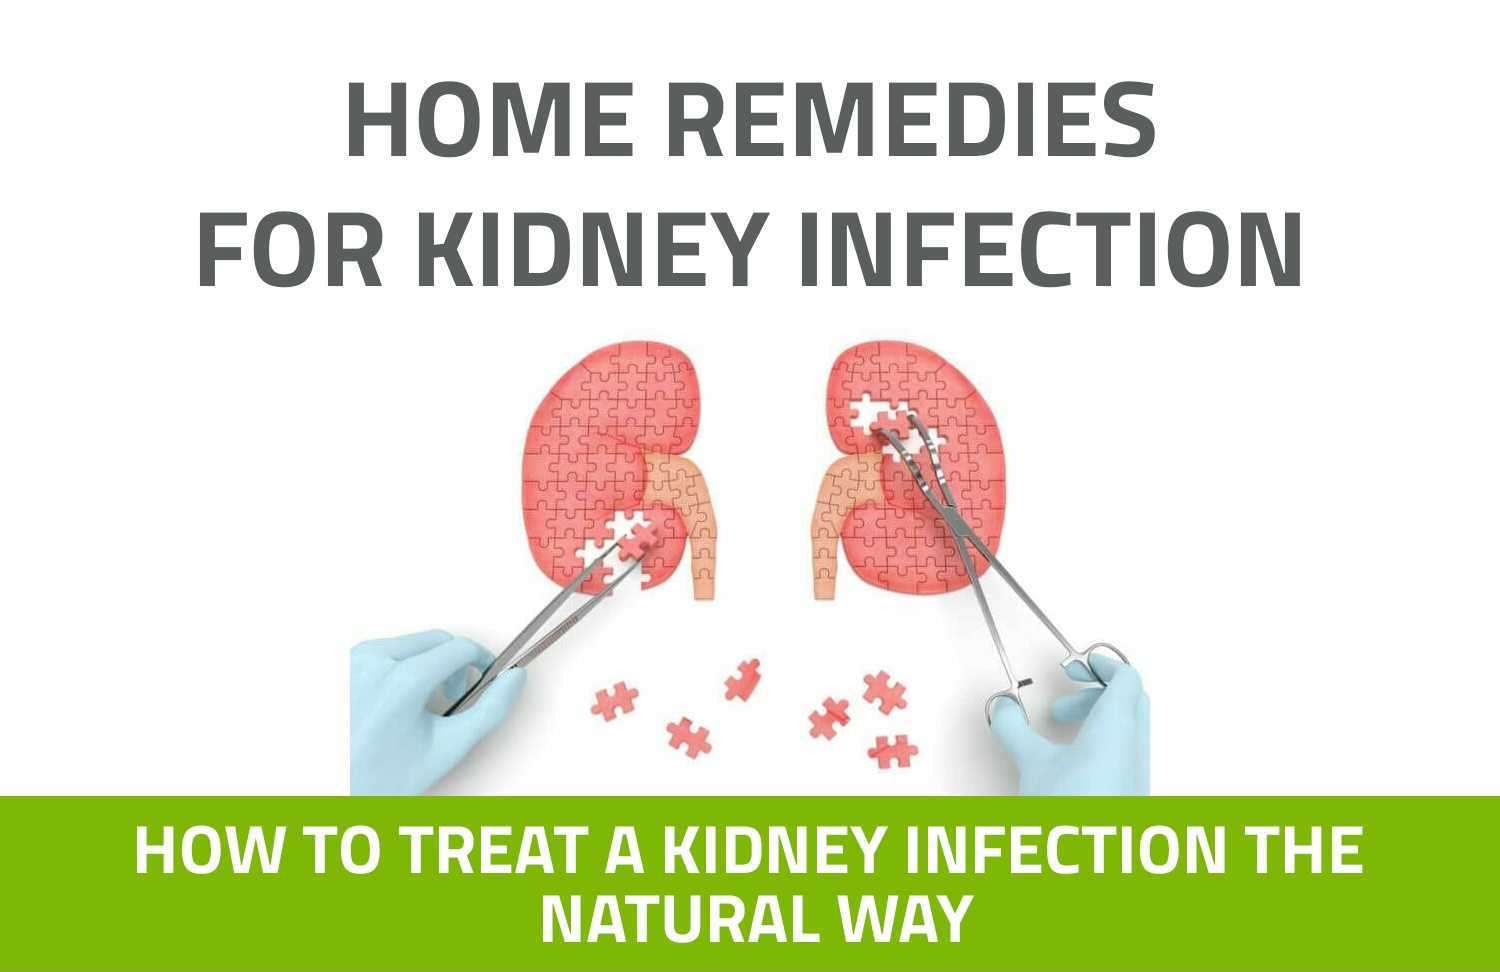 12 Home Remedies for Kidney Infection [Infographic]